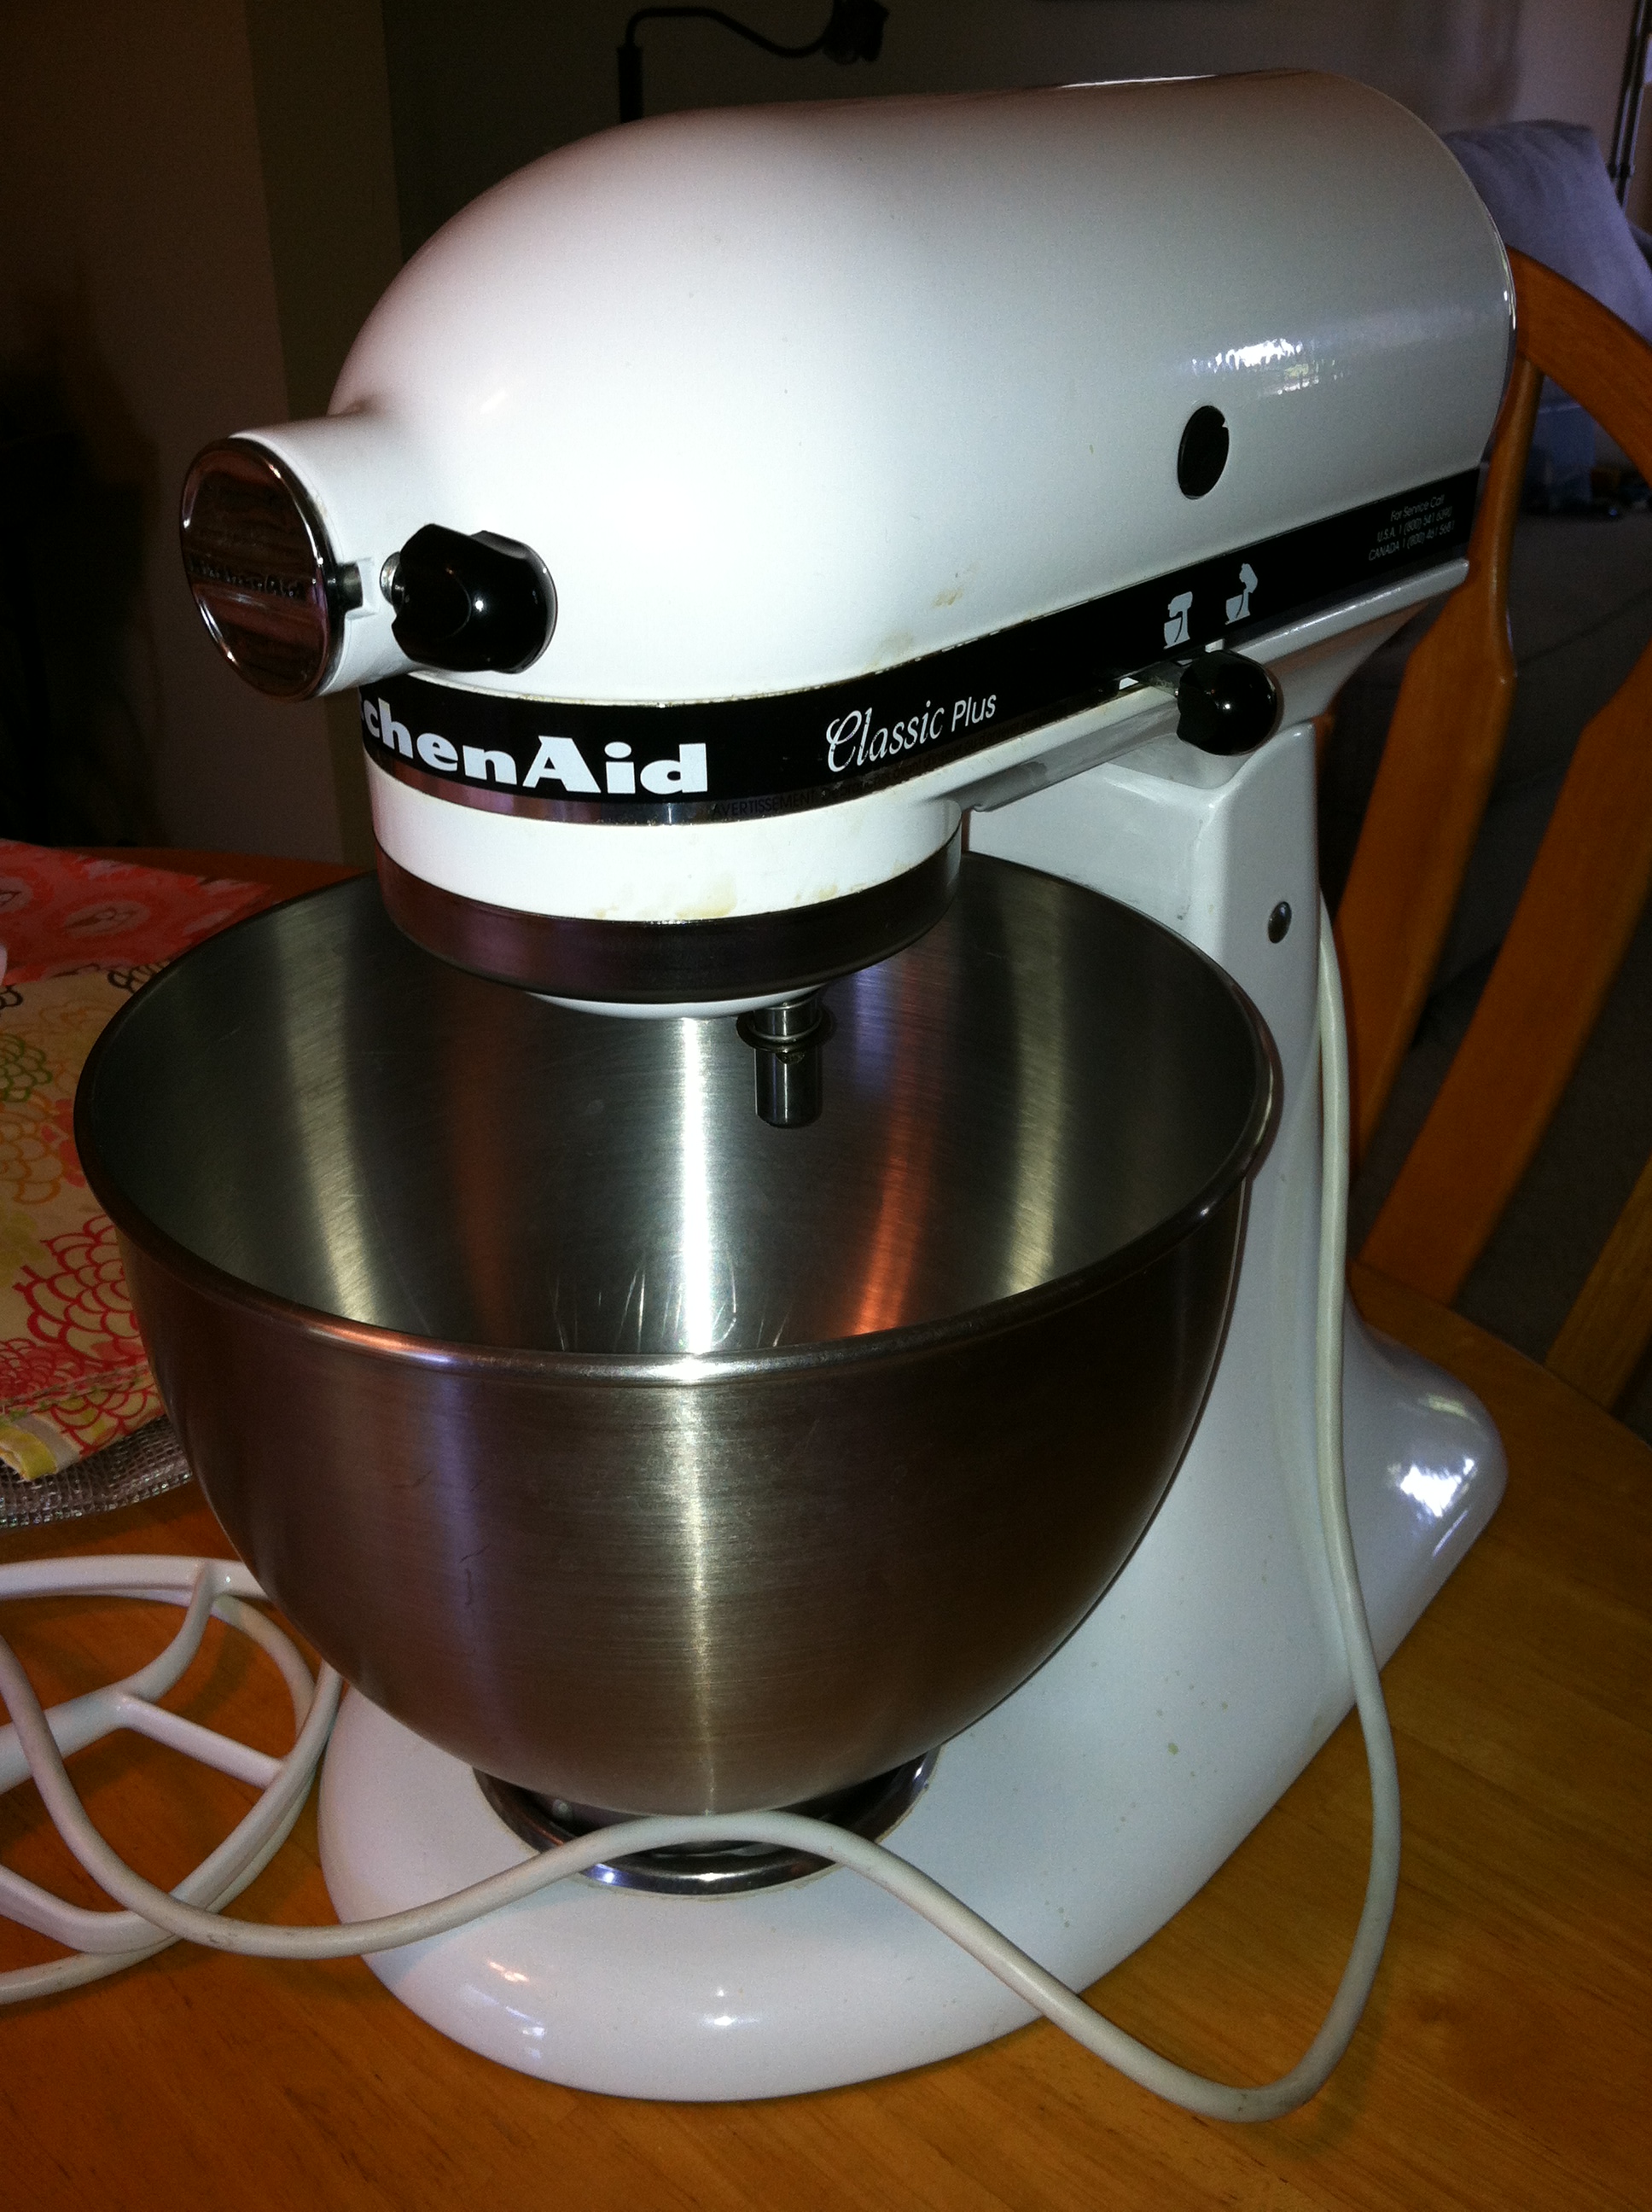 KitchenAid Professional Mixer Pattern to Make a Mixer Dust Cover